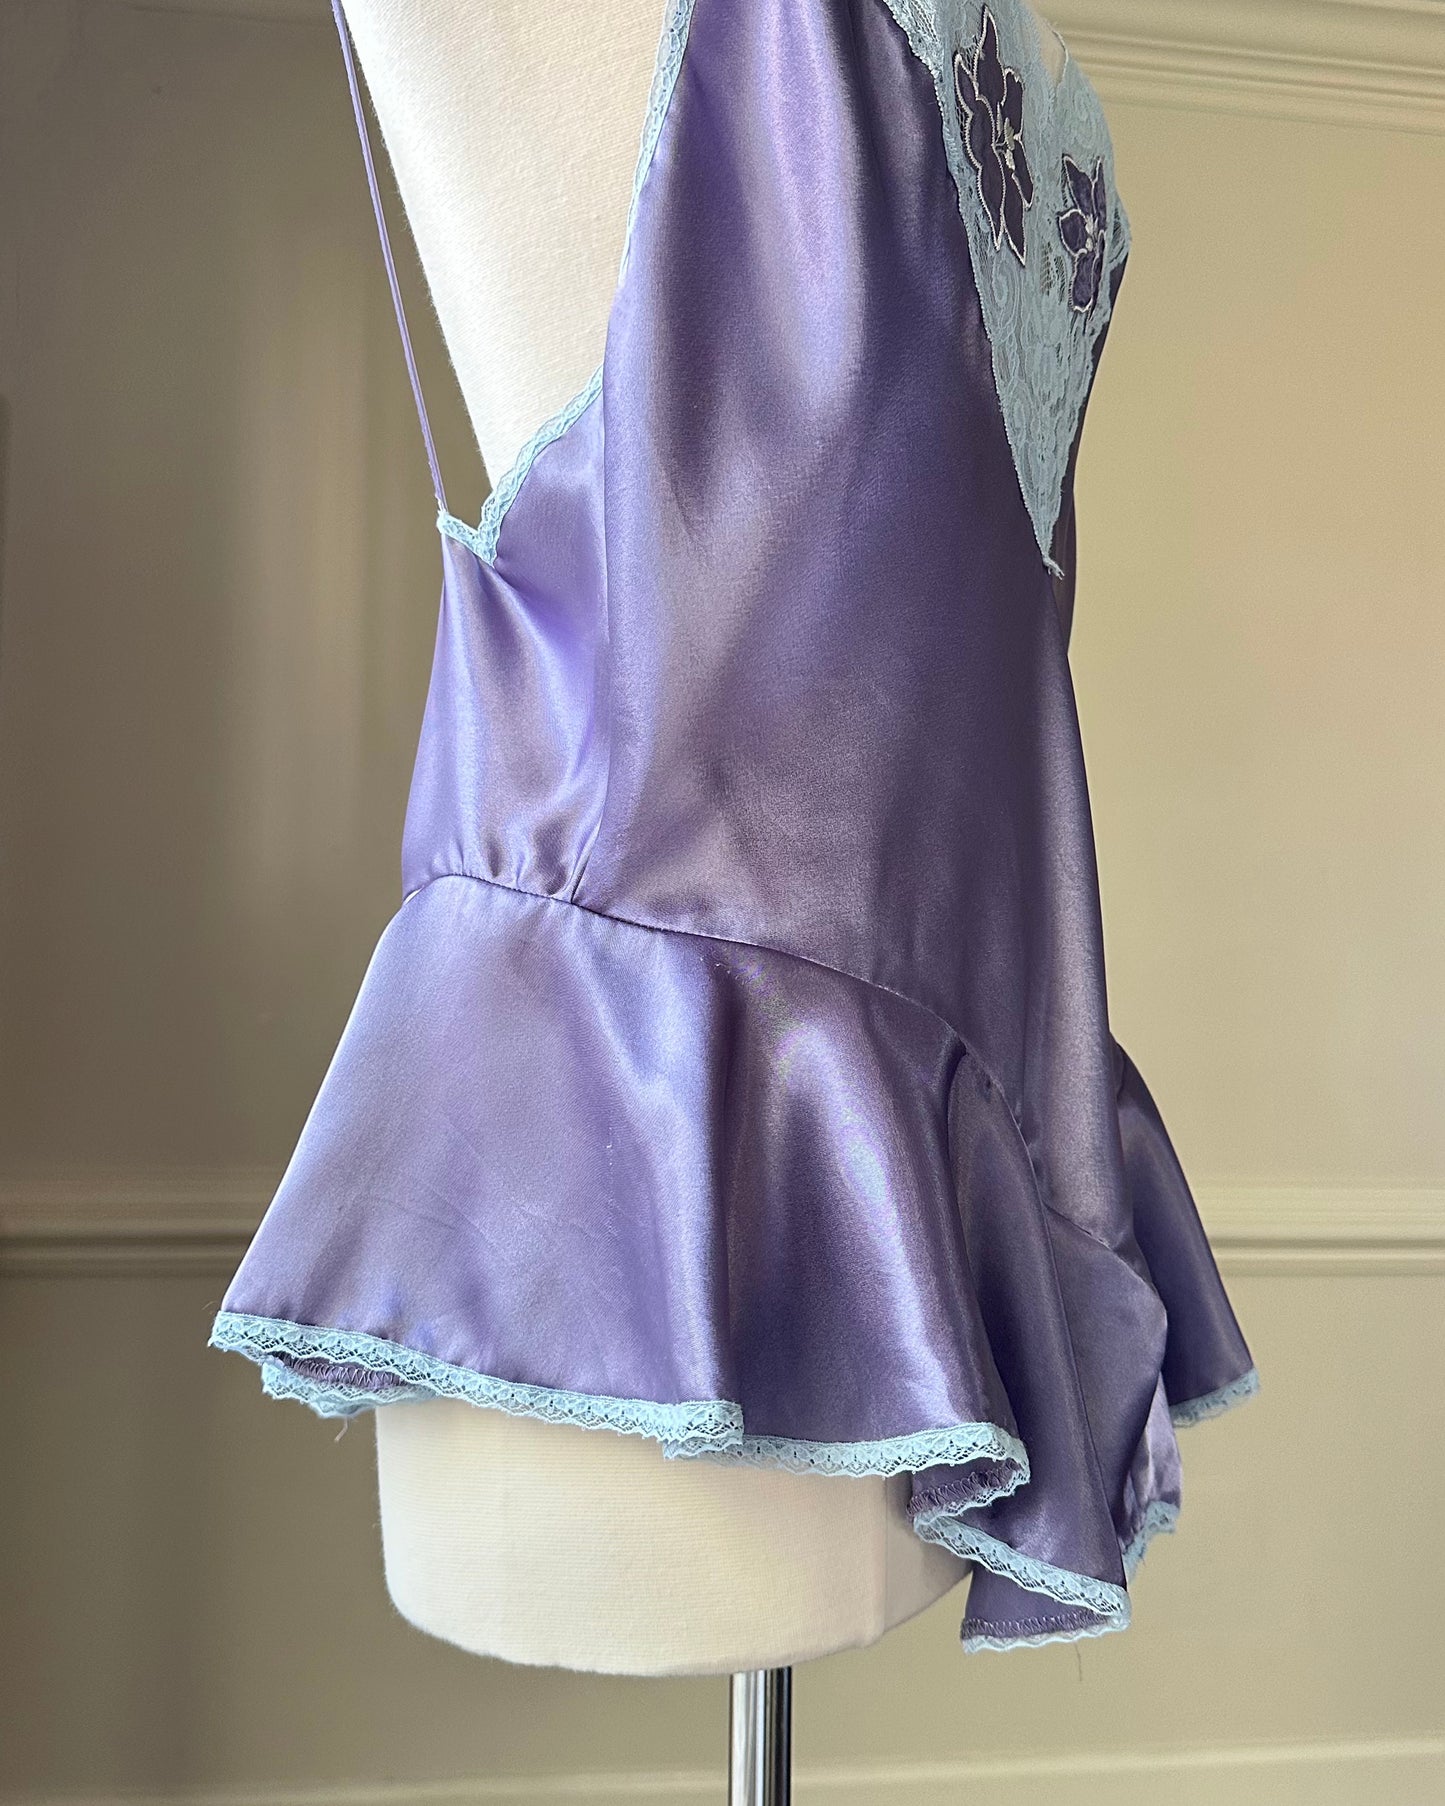 Vintage Satin Slip Dress in Eggplant Purple featuring Lace V Cutout